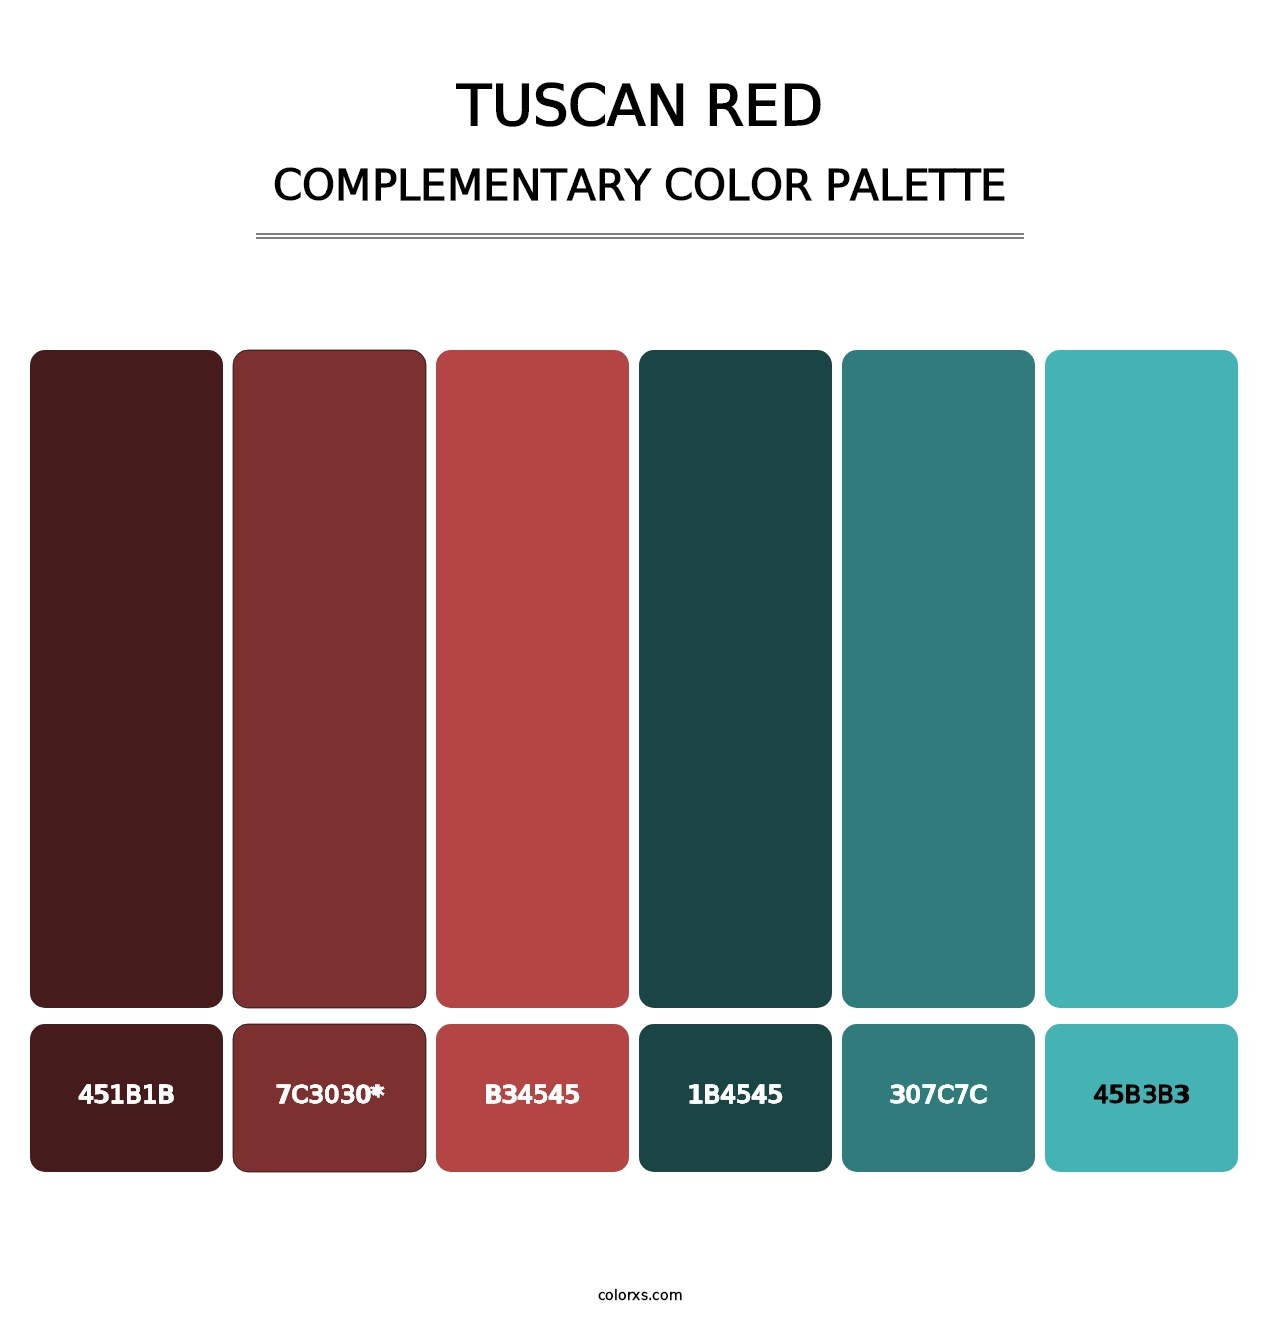 Tuscan Red - Complementary Color Palette